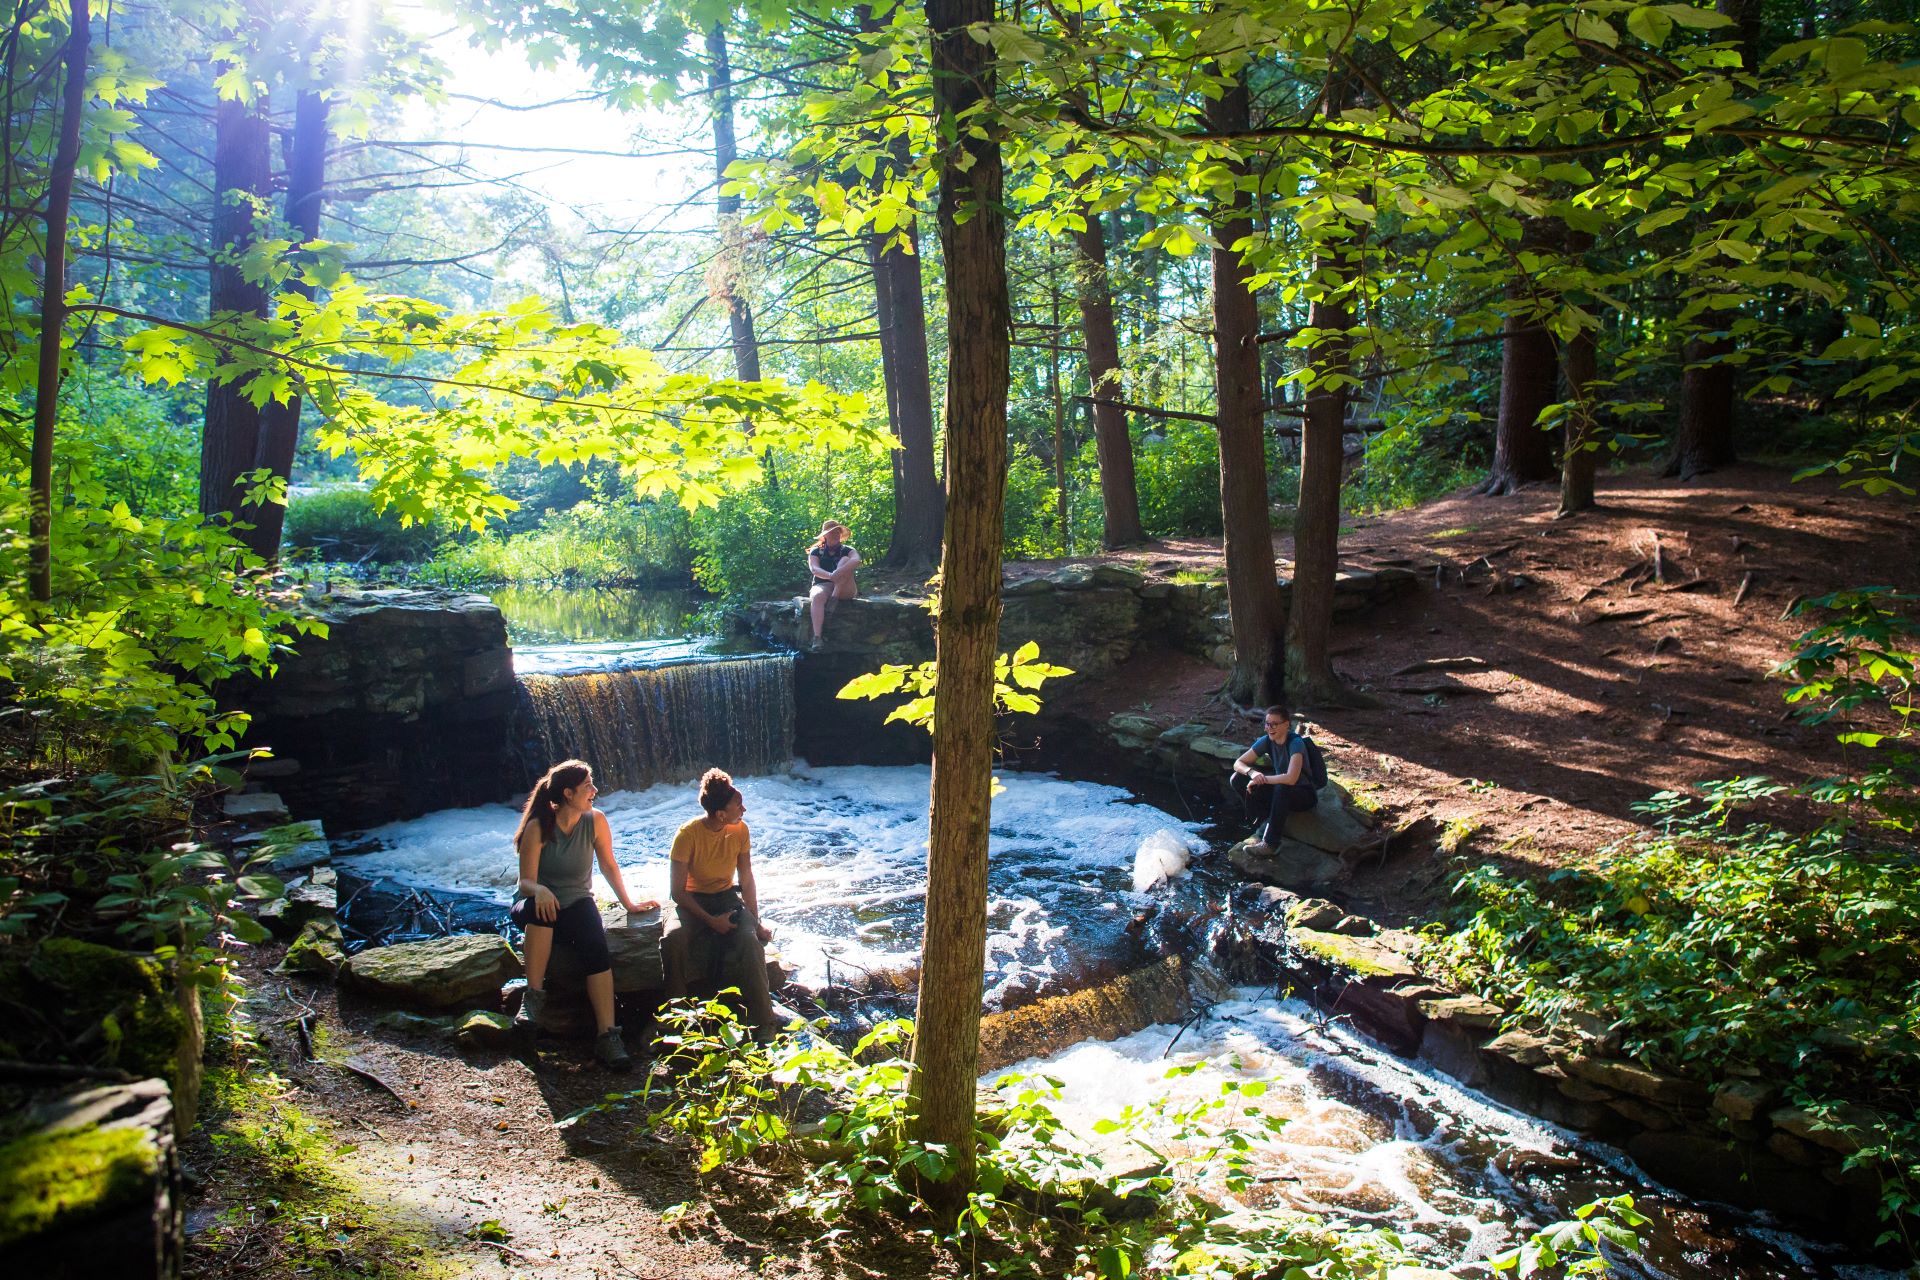 People sitting around a waterfall with sun coming in